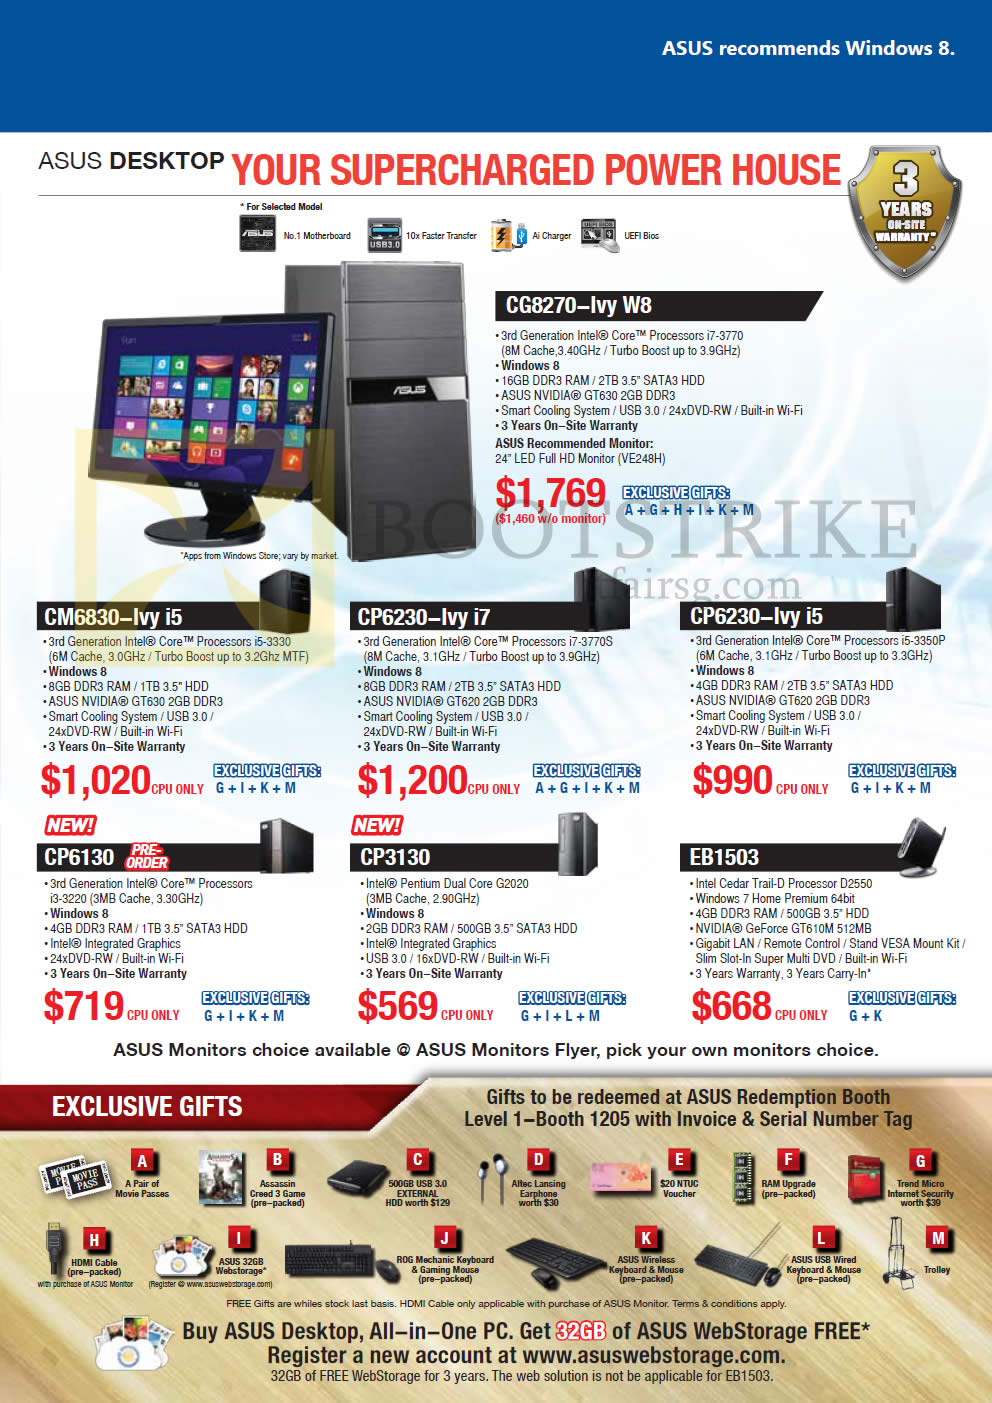 IT SHOW 2013 price list image brochure of ASUS Desktop PC CG8270-Ivy W8, CM6830-Ivy I5, CP6230-Ivy I7 I5, CP6130, CP3130, EB1503